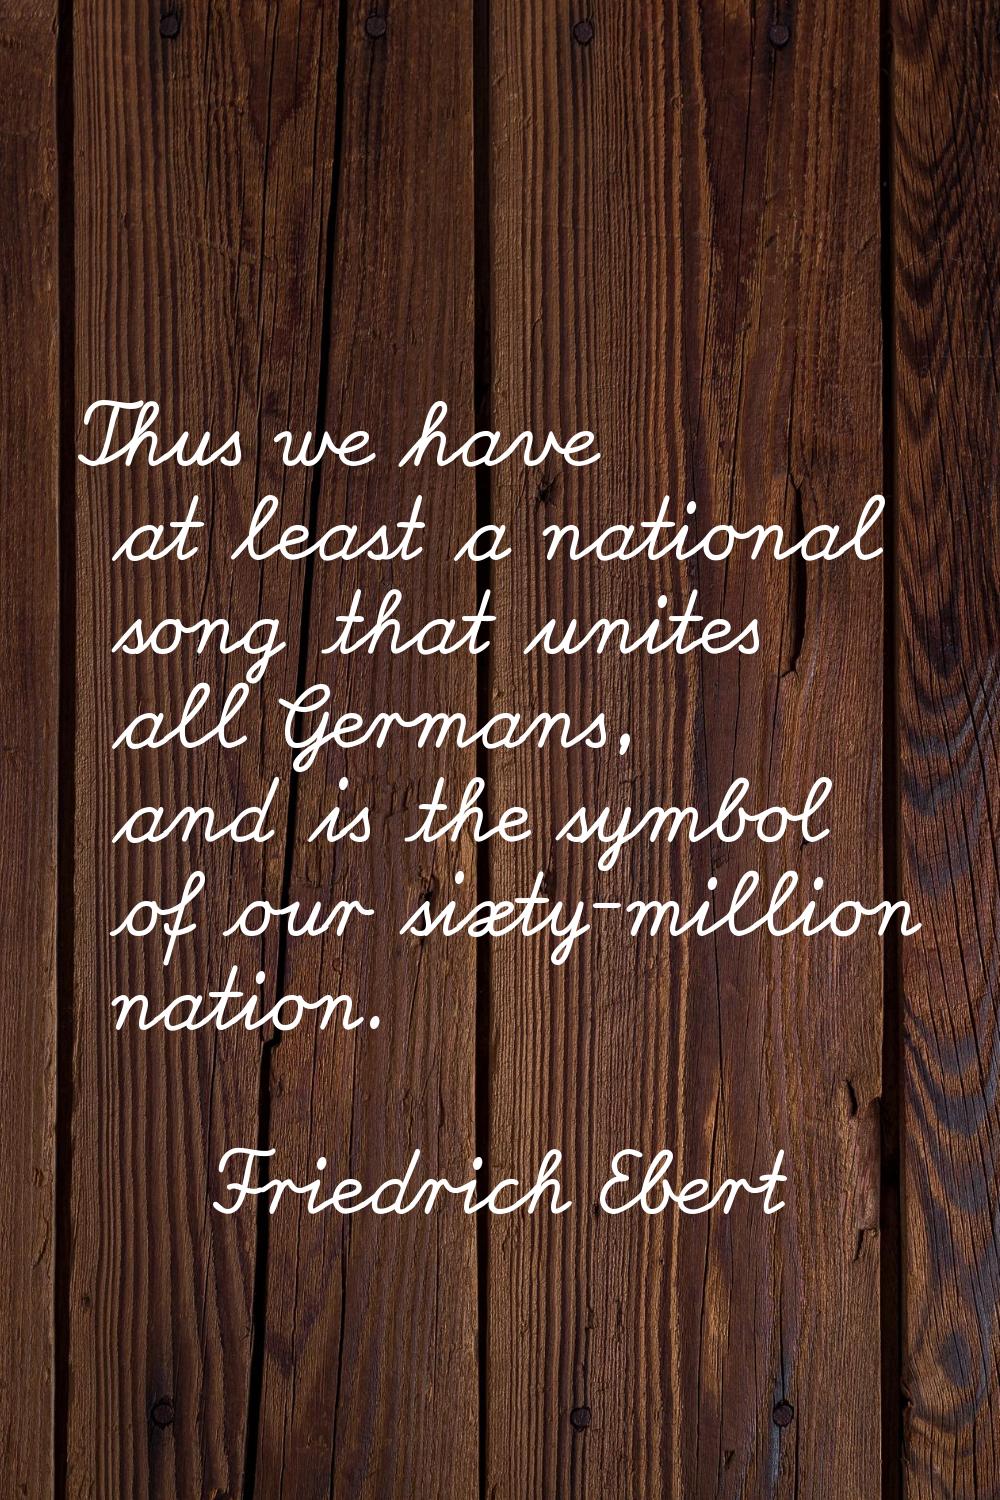 Thus we have at least a national song that unites all Germans, and is the symbol of our sixty-milli